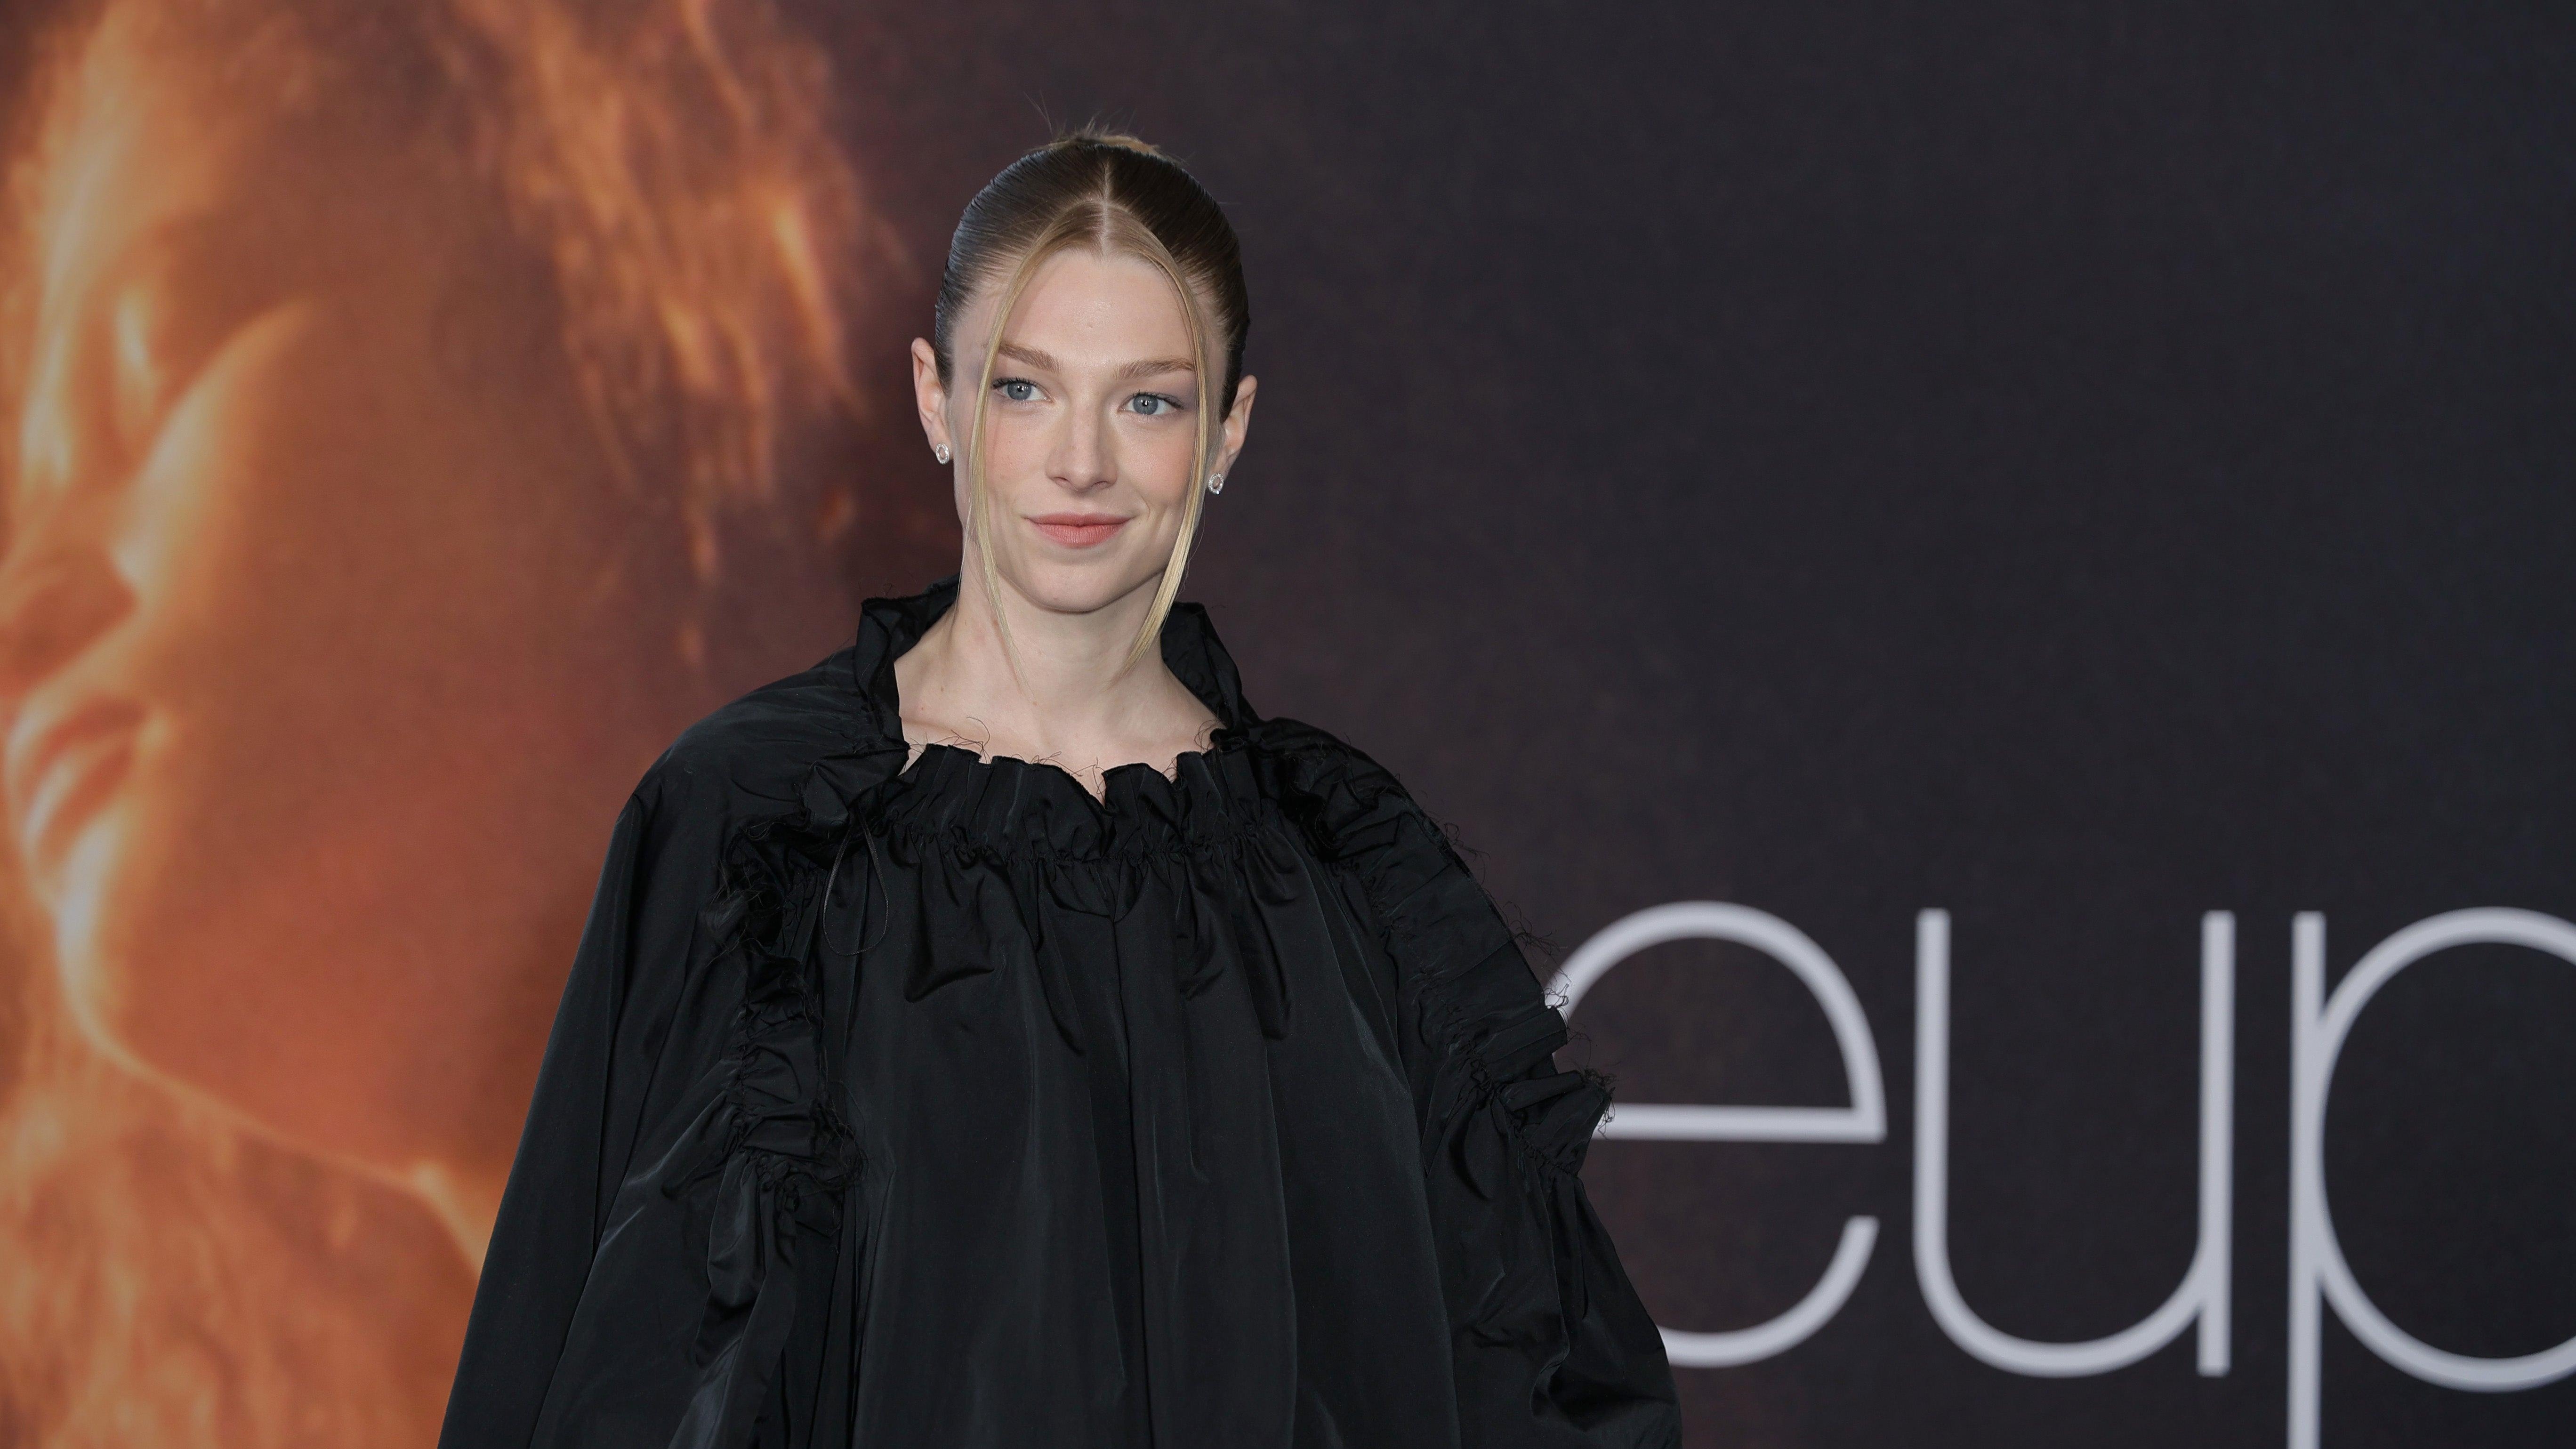 Euphoria‘s Hunter Schafer joins The Hunger Games: The Ballad Of Songbirds And Snakes